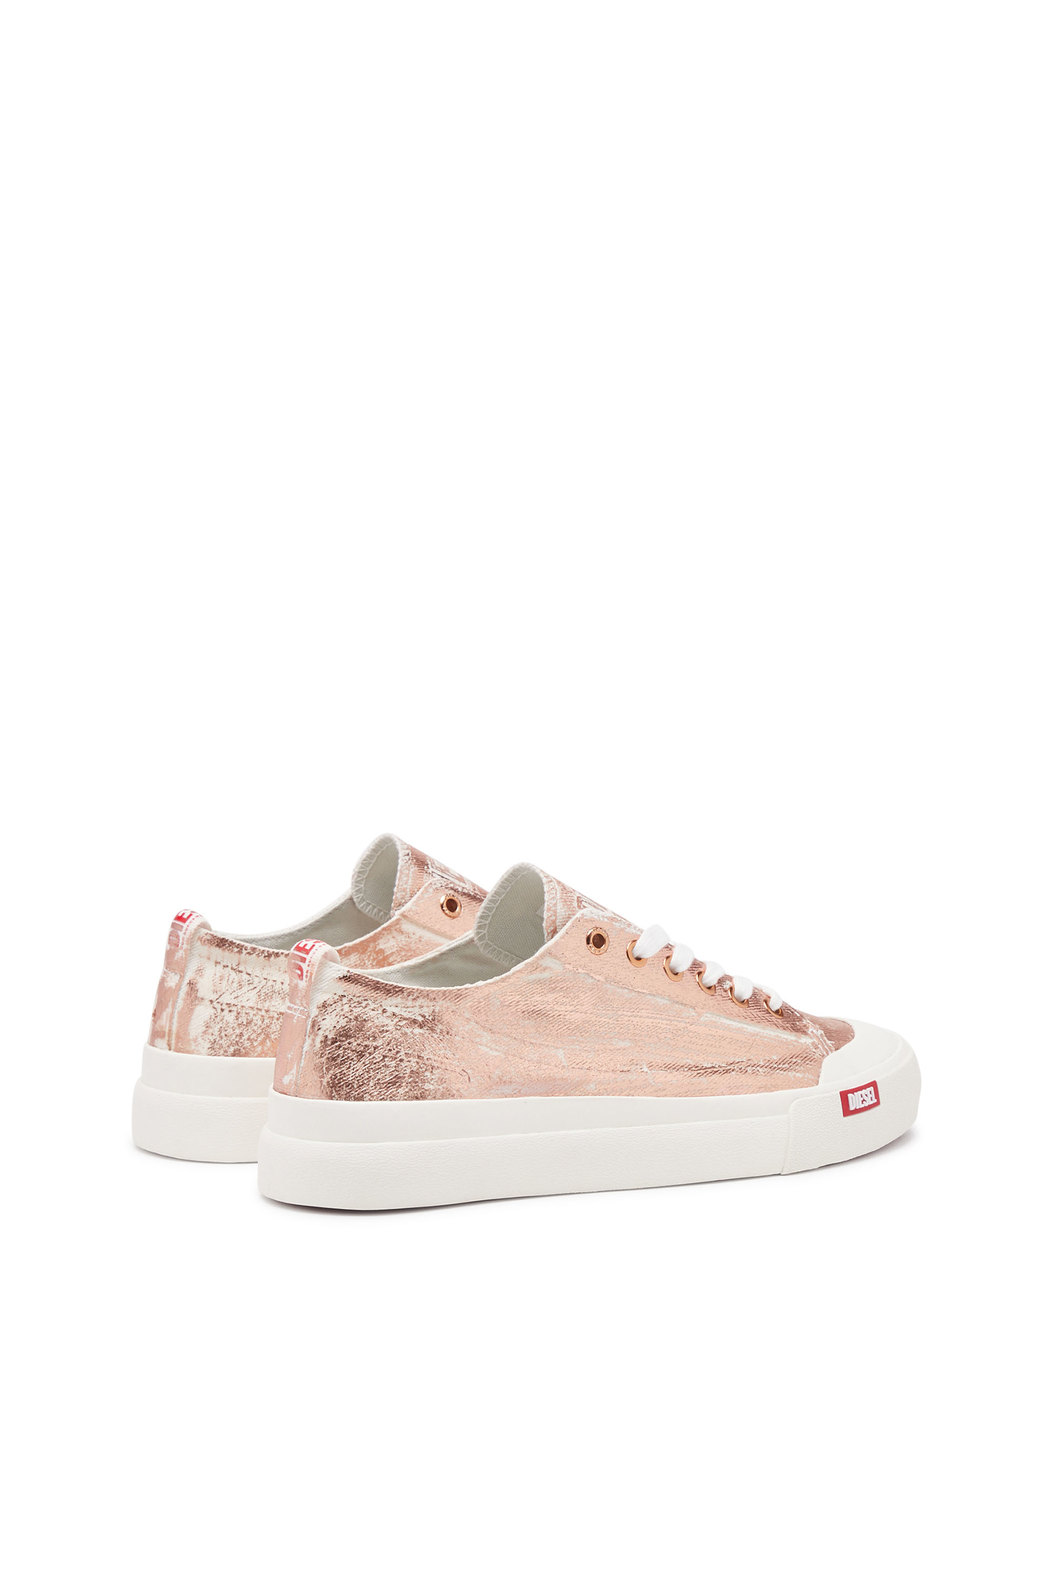 S-Athos Low W - Distressed sneakers in metallic canvas